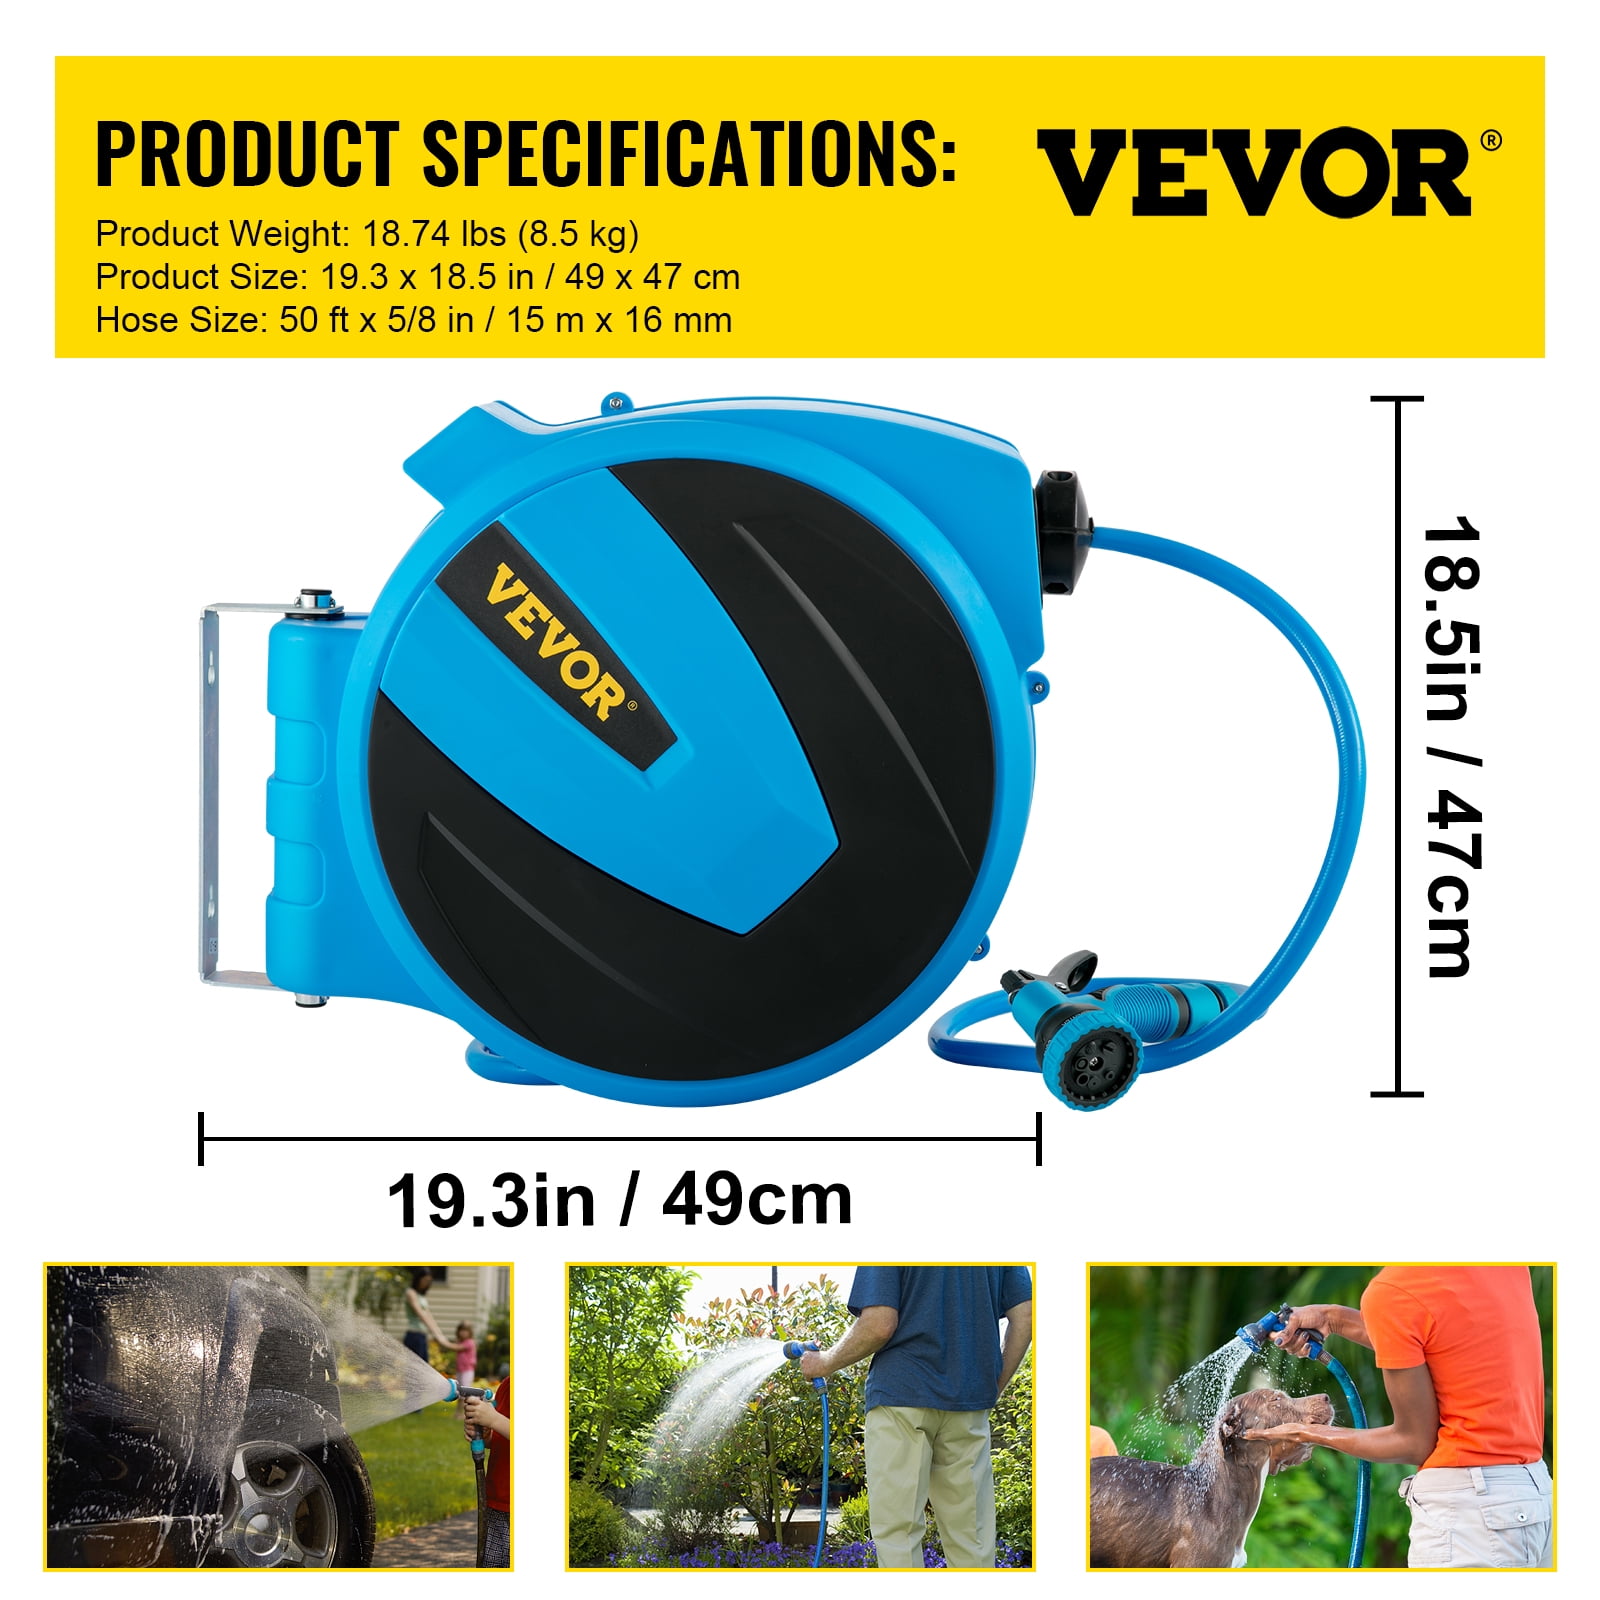 VEVOR Retractable Hose Reel, 5/8 inch x 50 ft, Any Length Lock